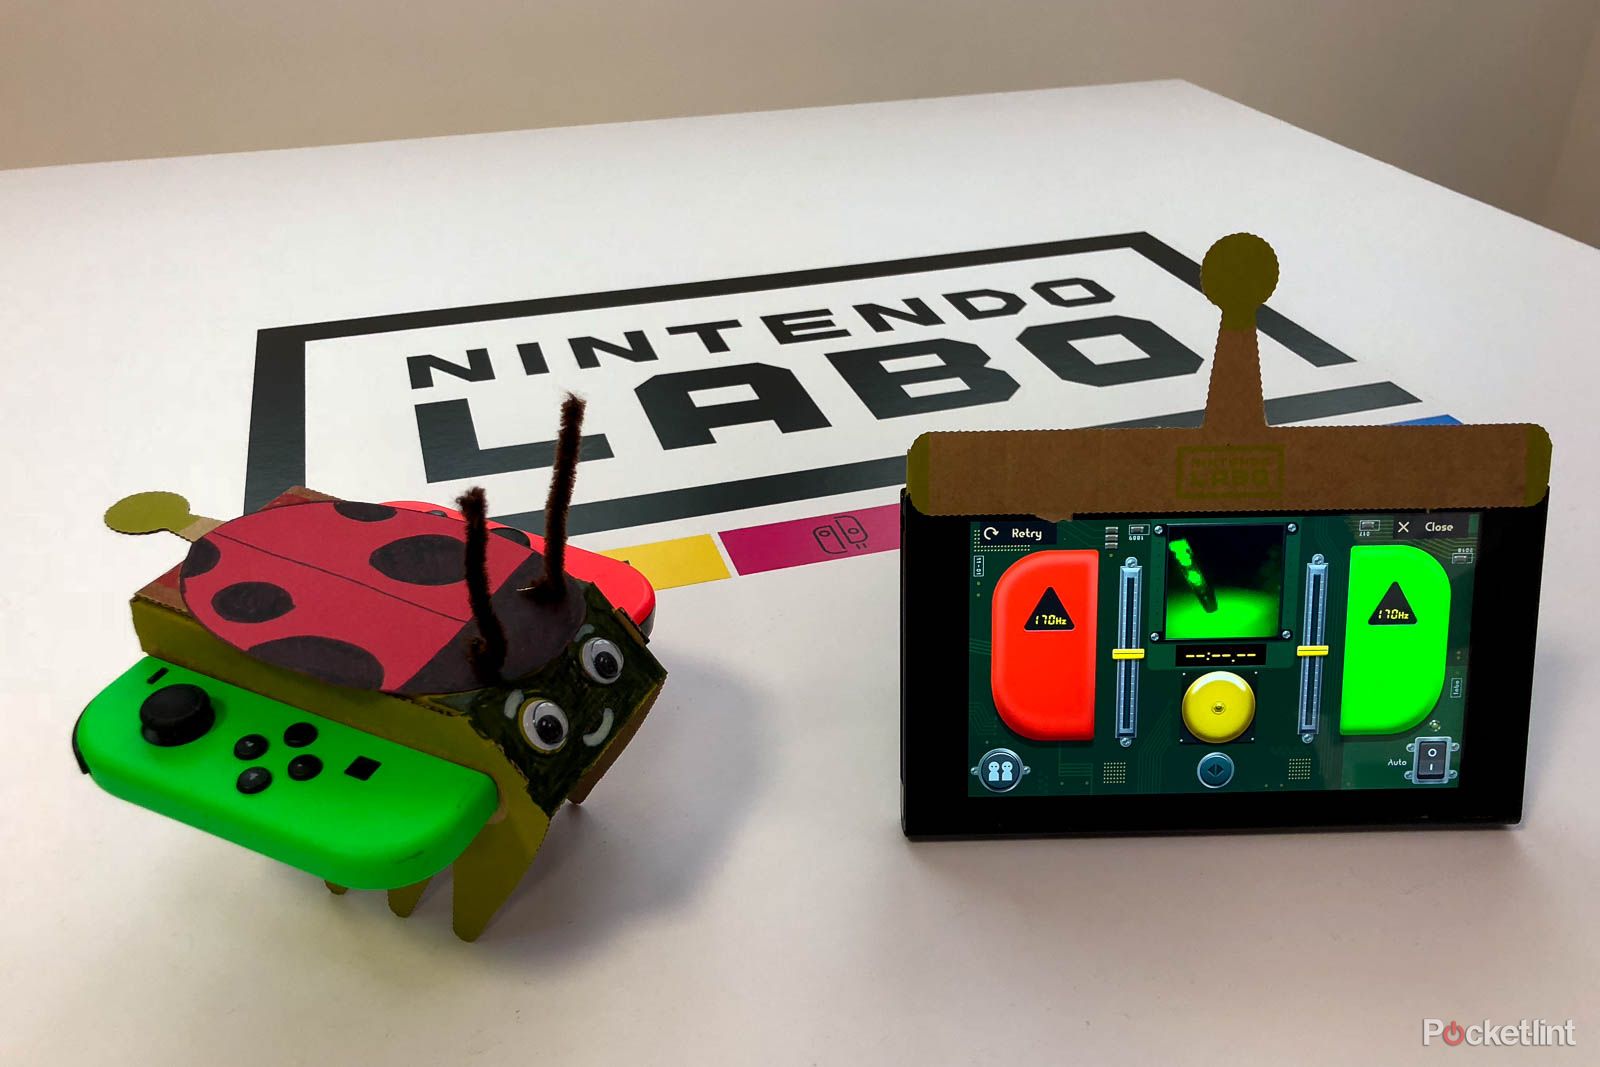 https://static1.pocketlintimages.com/wordpress/wp-content/uploads/wm/144217-games-review-nintendo-labo-intitial-review-crazy-cardboard-fun-for-the-switch-image1-tfxtcihzkl.jpg